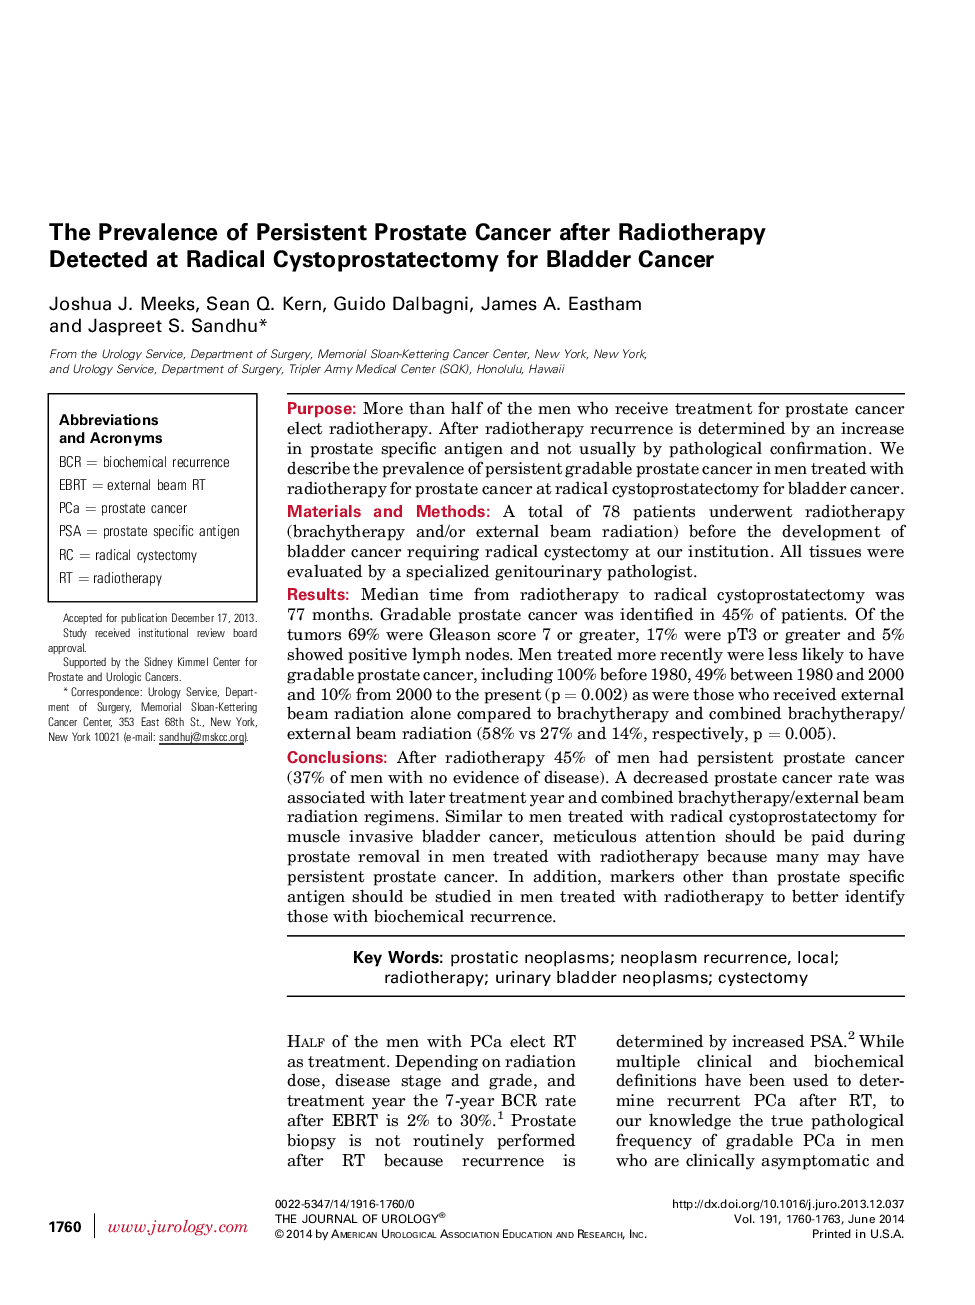 The Prevalence of Persistent Prostate Cancer after Radiotherapy Detected at Radical Cystoprostatectomy for Bladder Cancer 